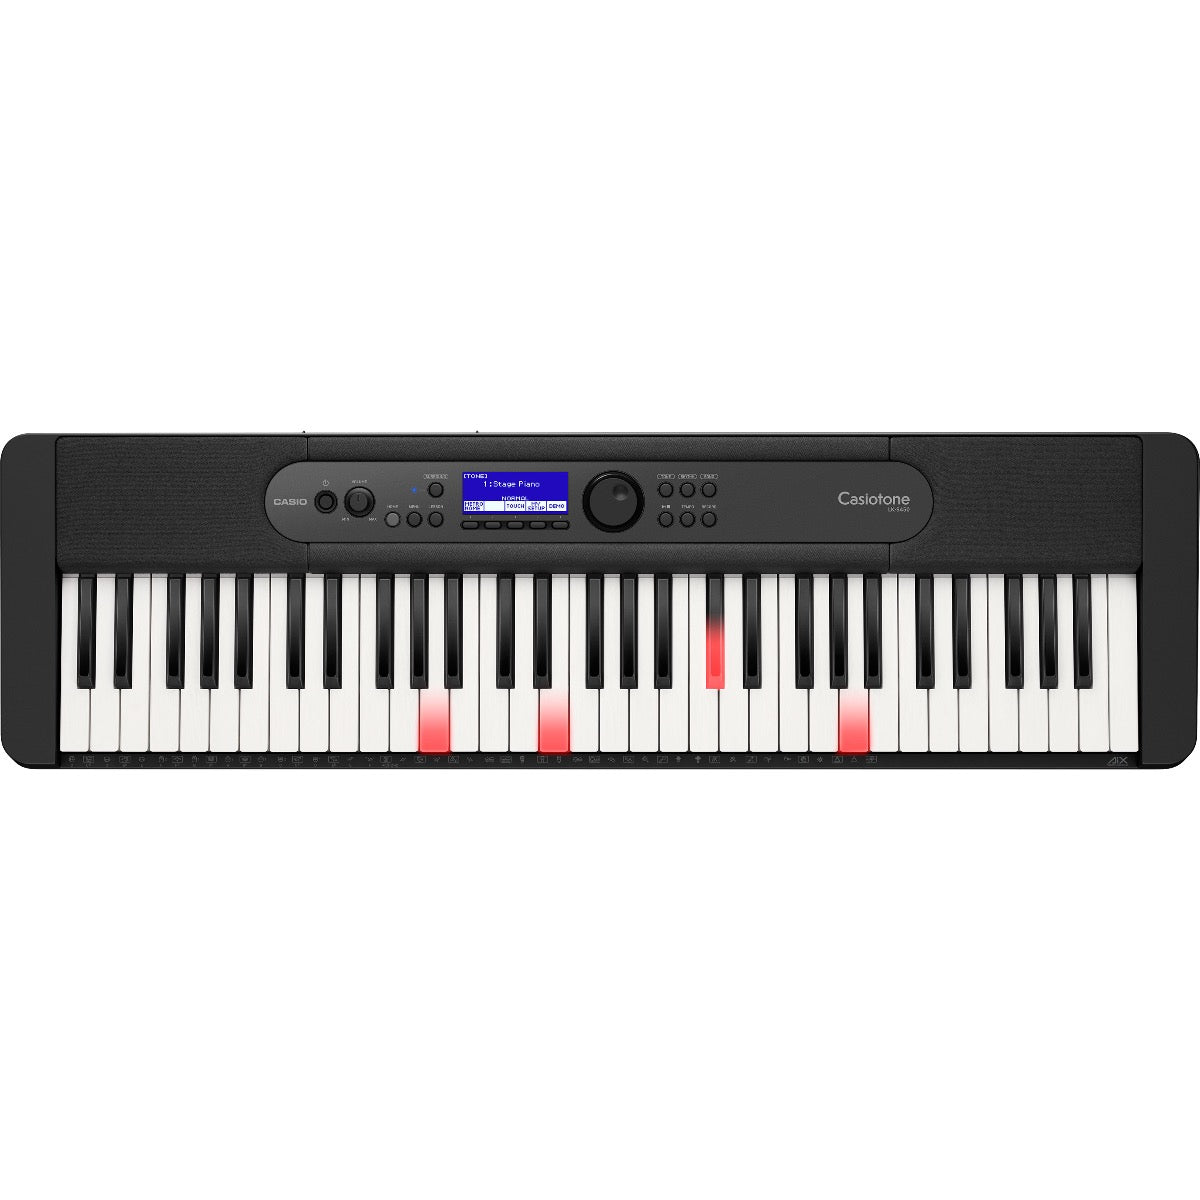 Top view of Casio Casiotone LK-S450 Portable Keyboard - Black